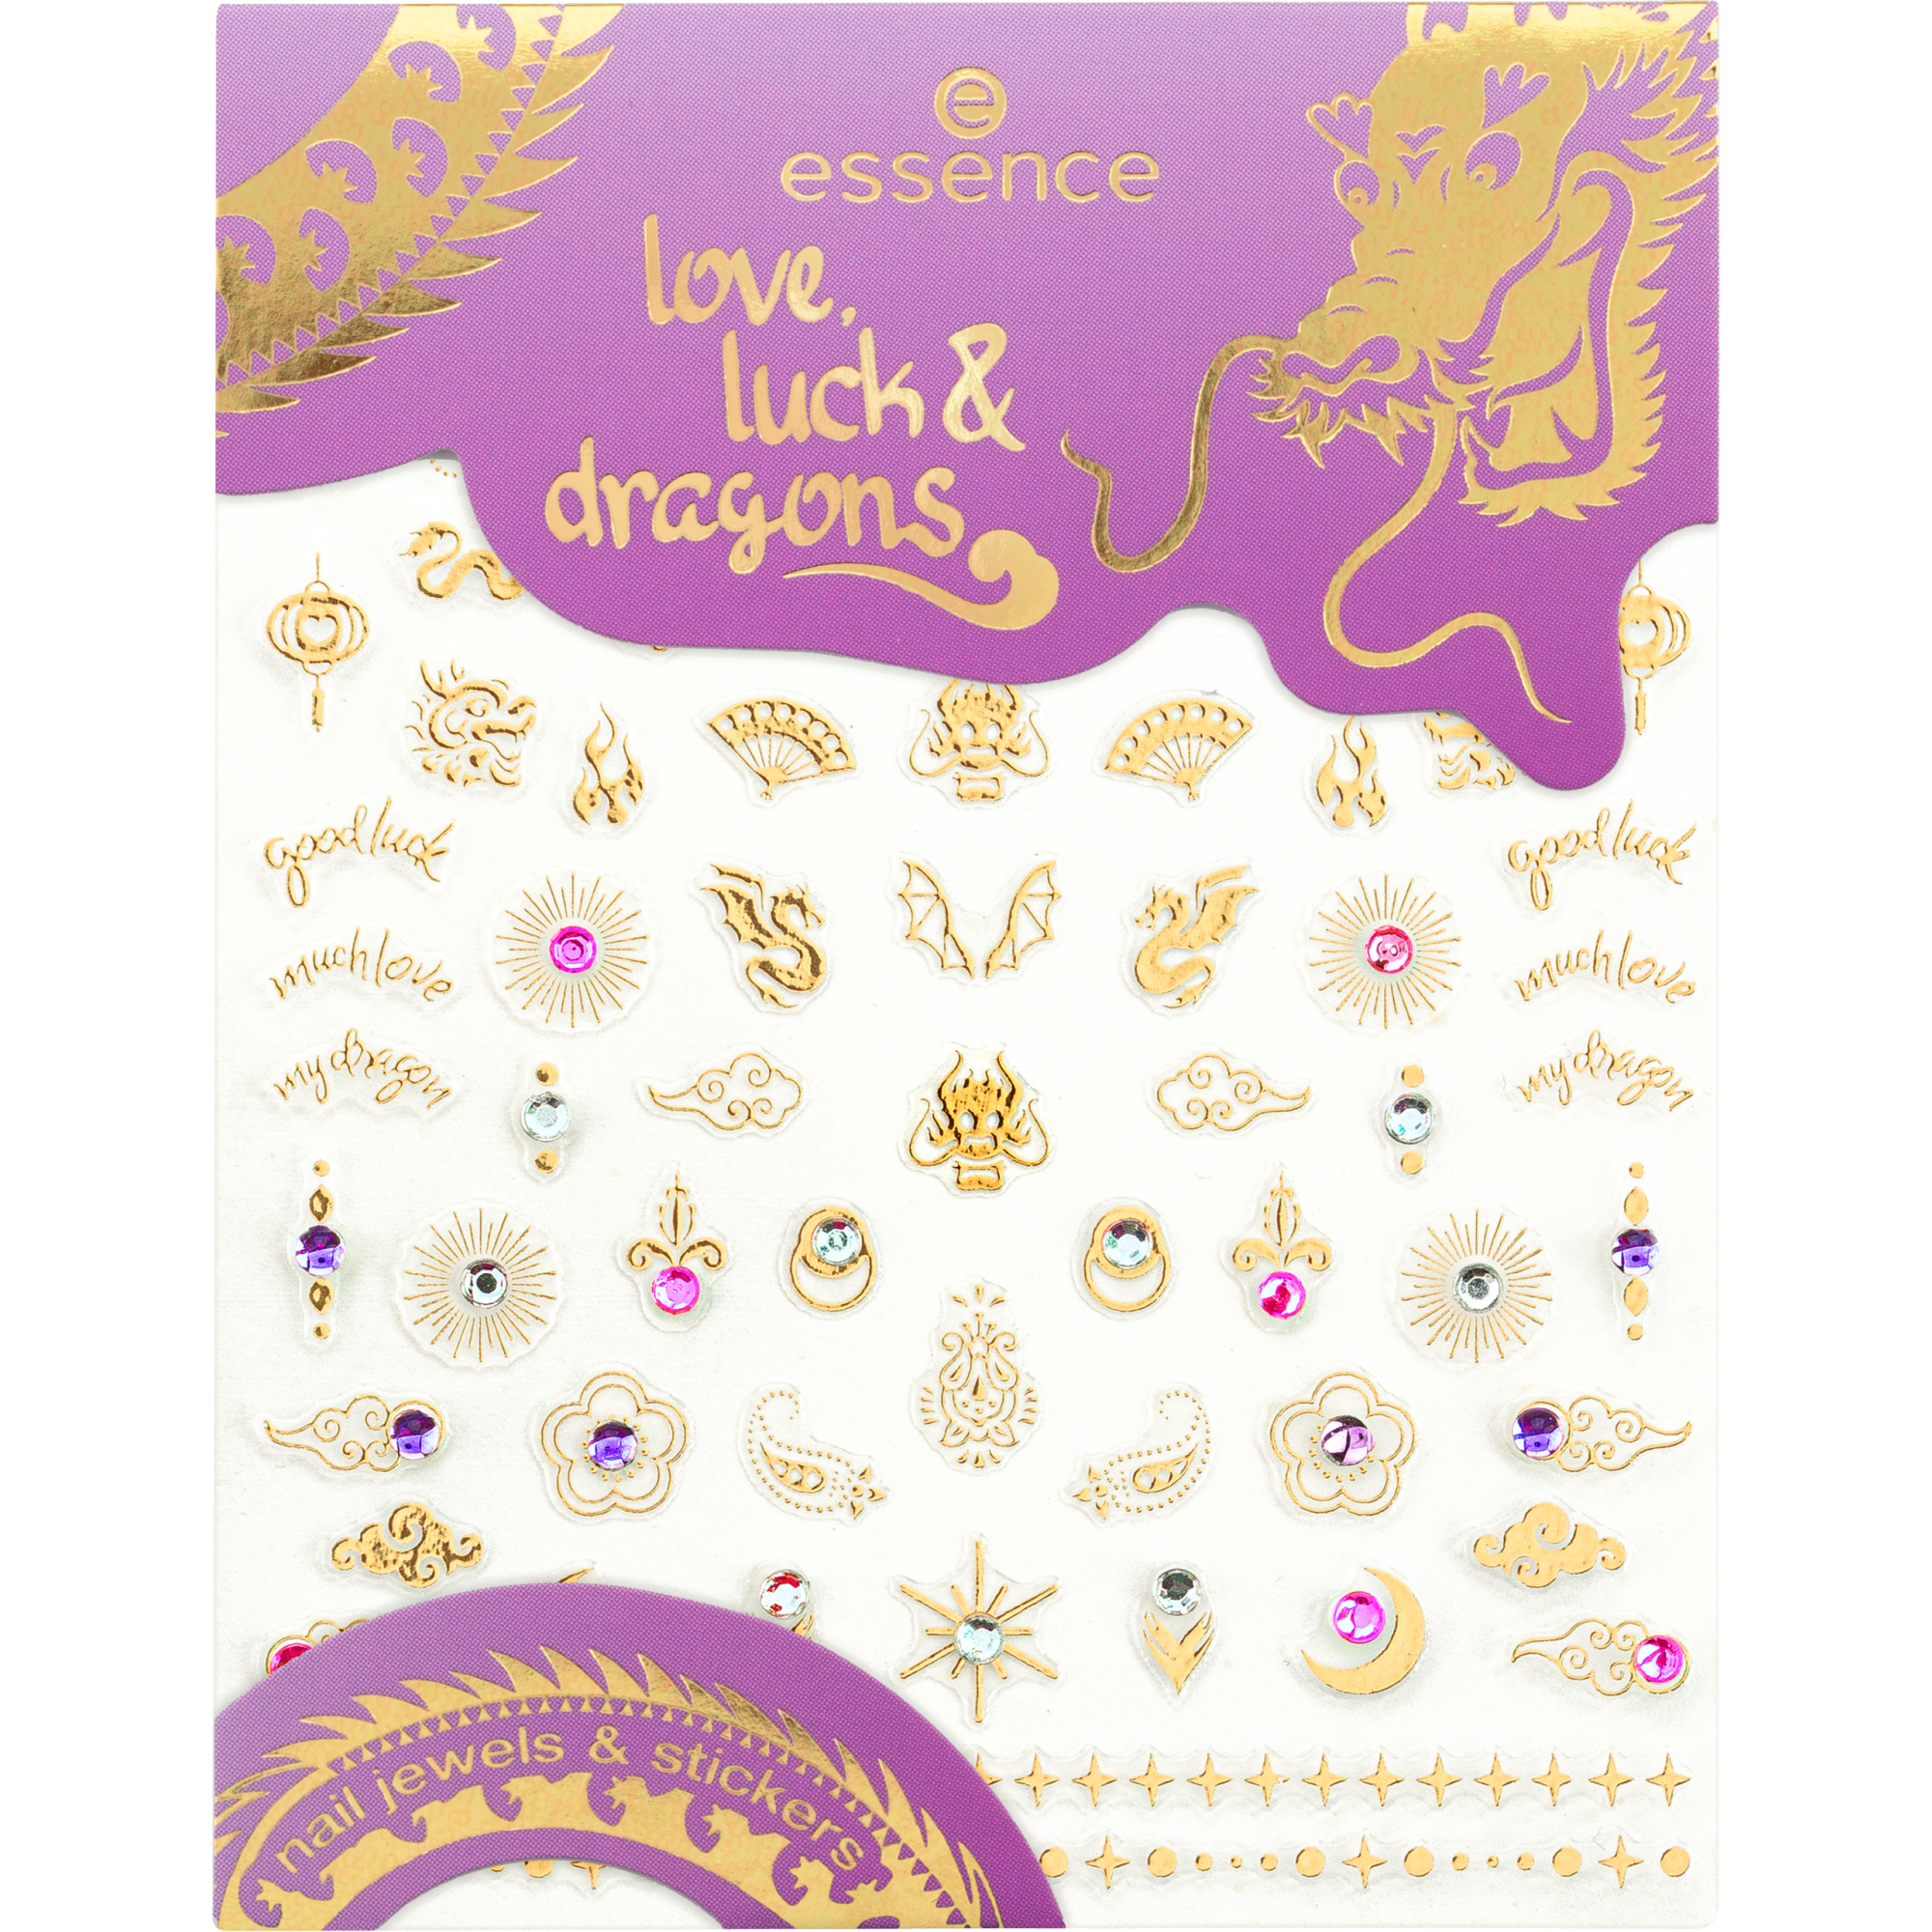 love, luck & dragons nail jewels & stickers